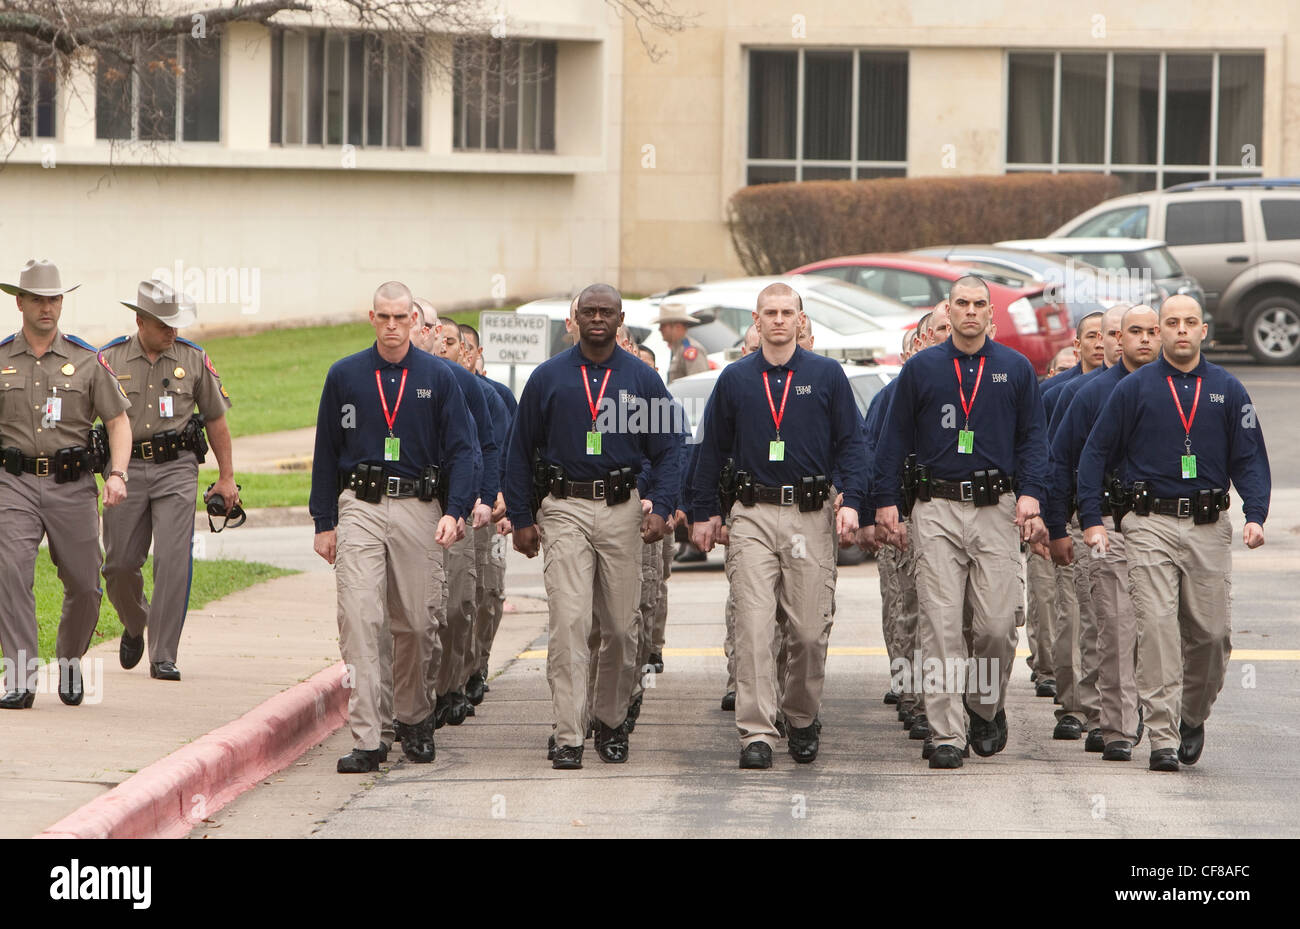 Group of Texas Department of Public Safety agent recruits during training exercise in Austin, Texas Stock Photo